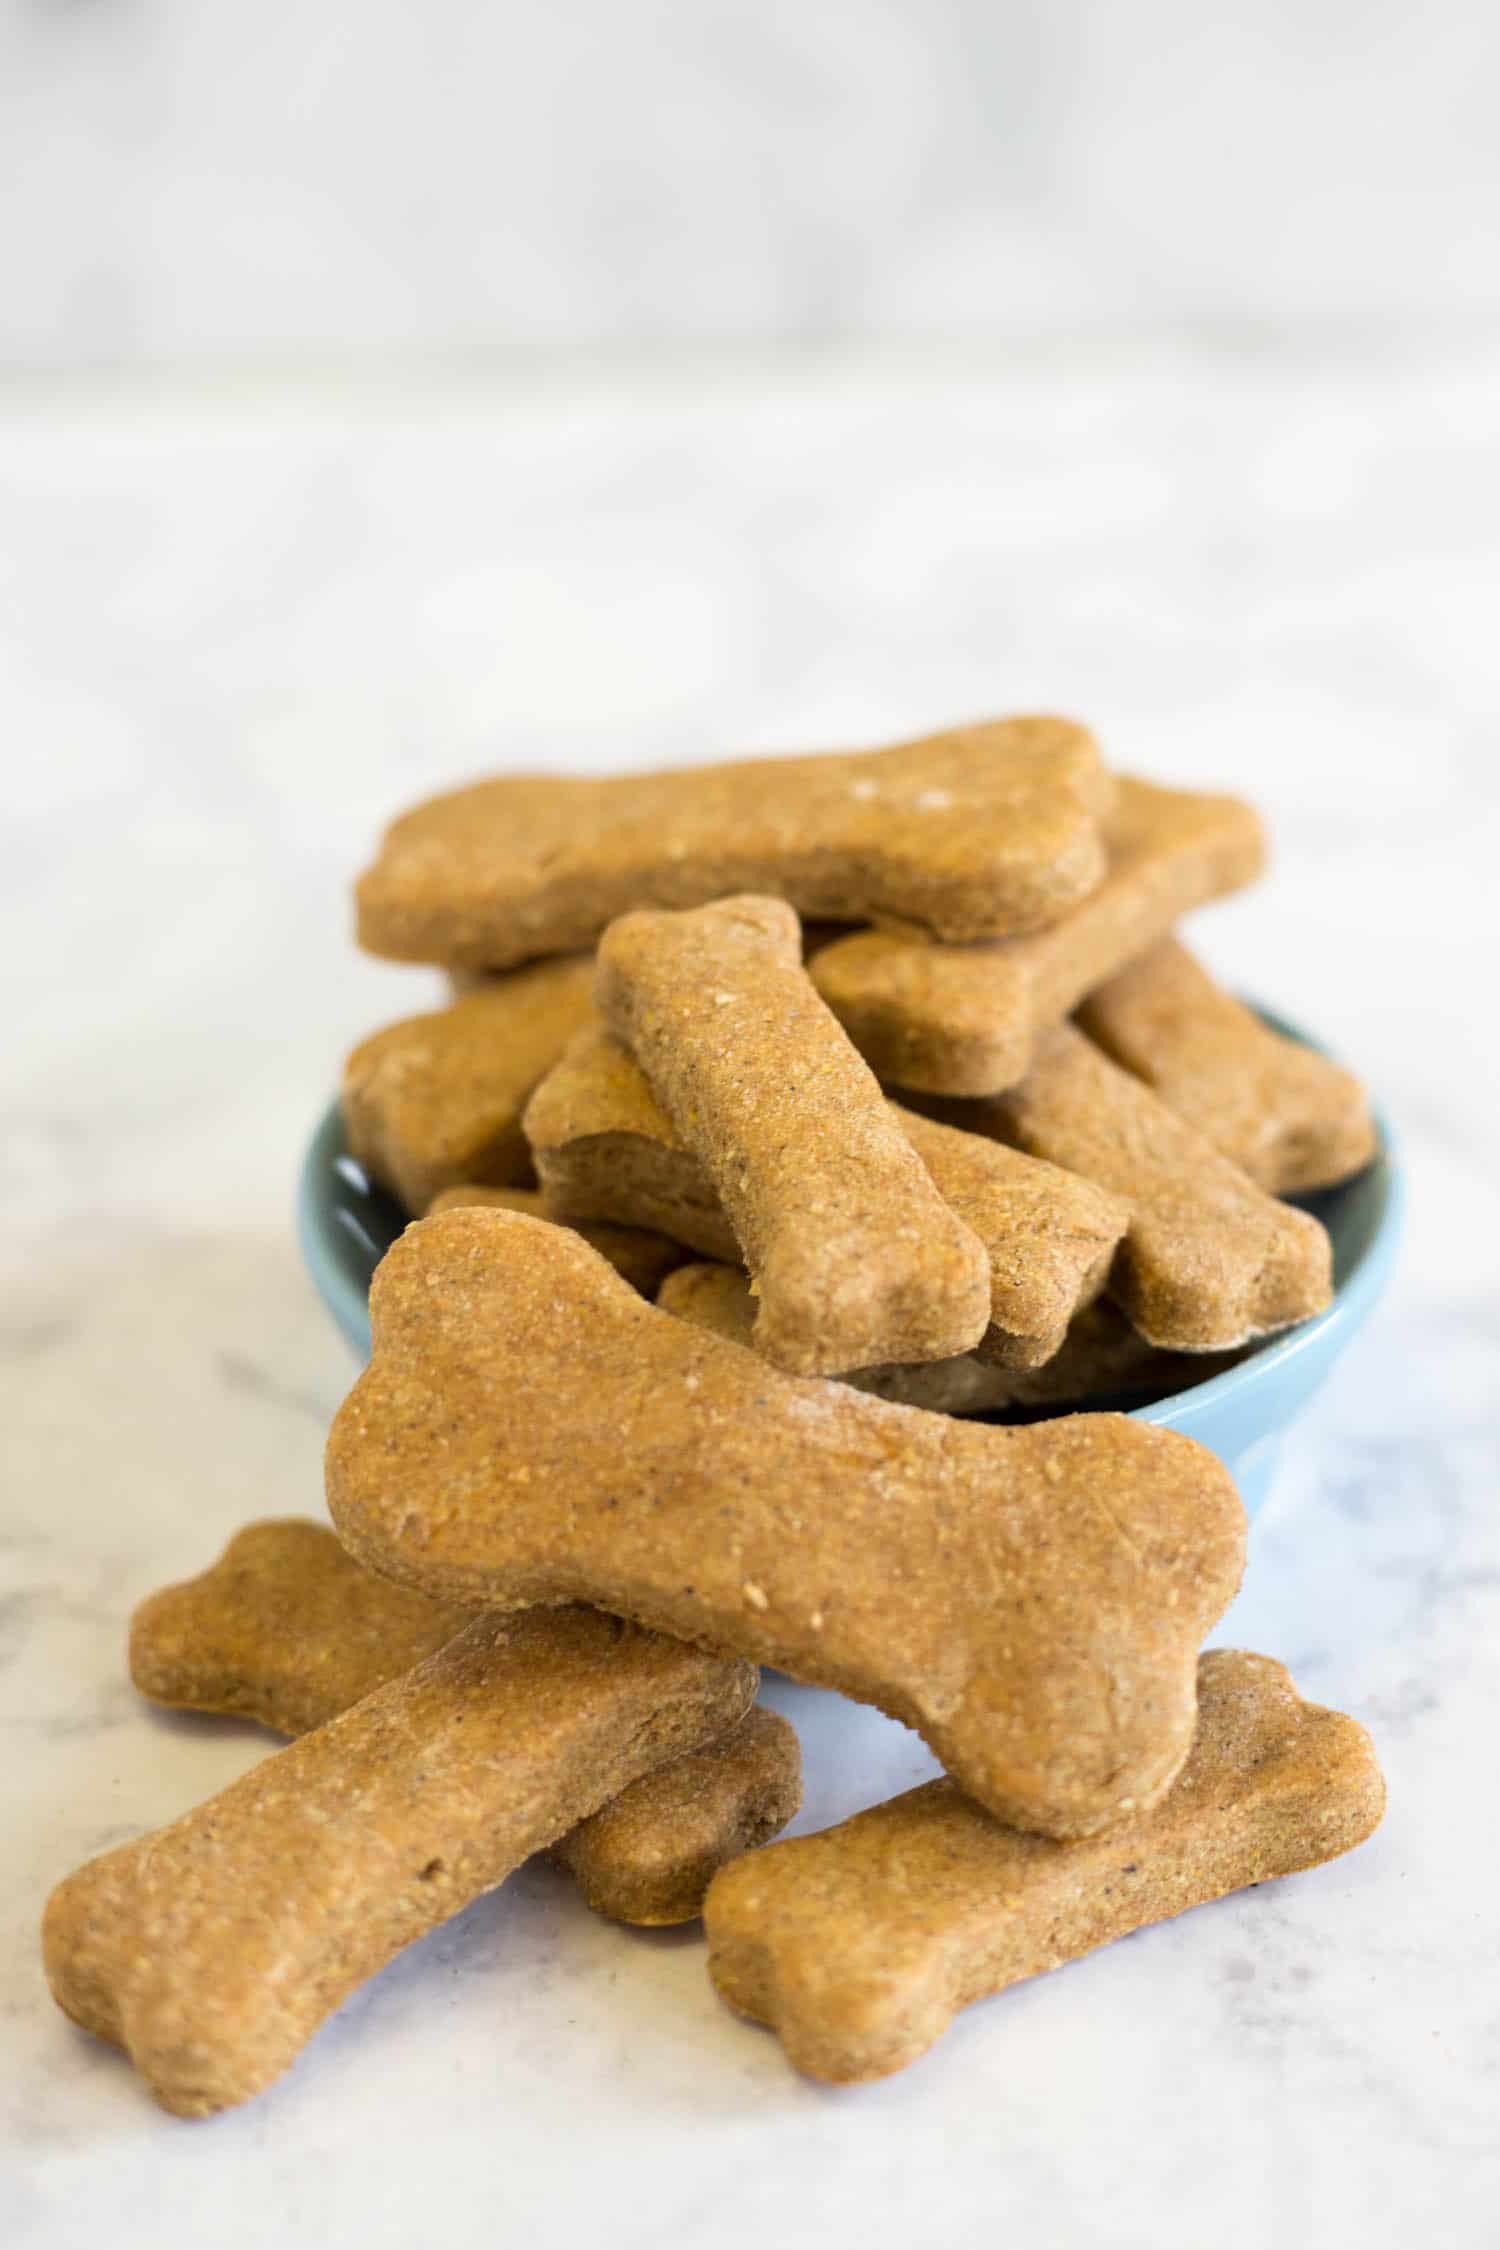 Bowl of homemade dog biscuits